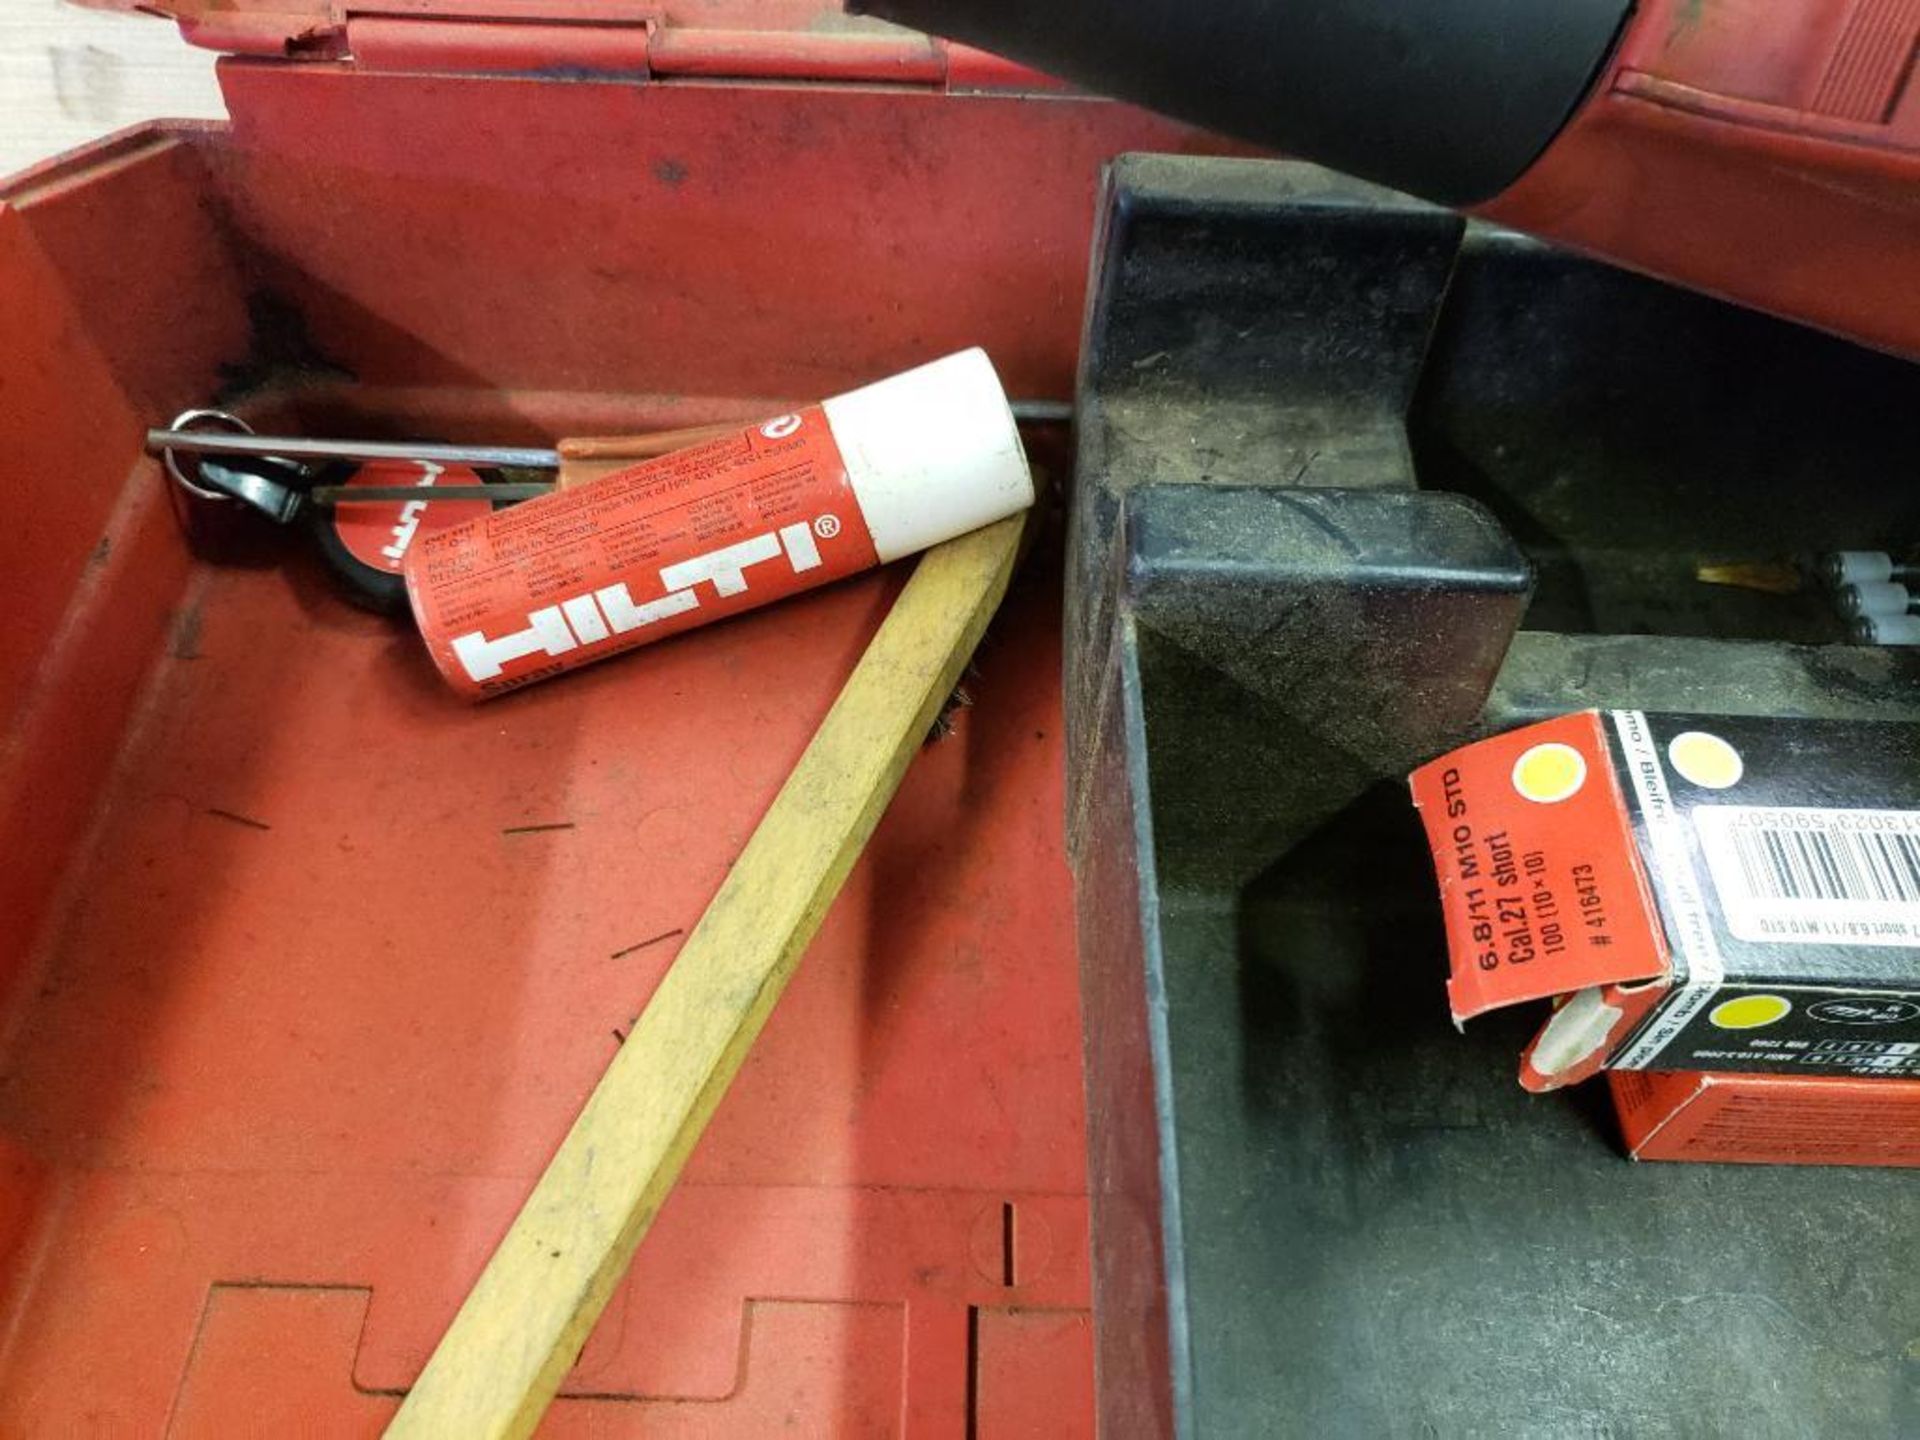 Hilti DXA41 powder actuated tool, with MX72 magazine. - Image 8 of 9